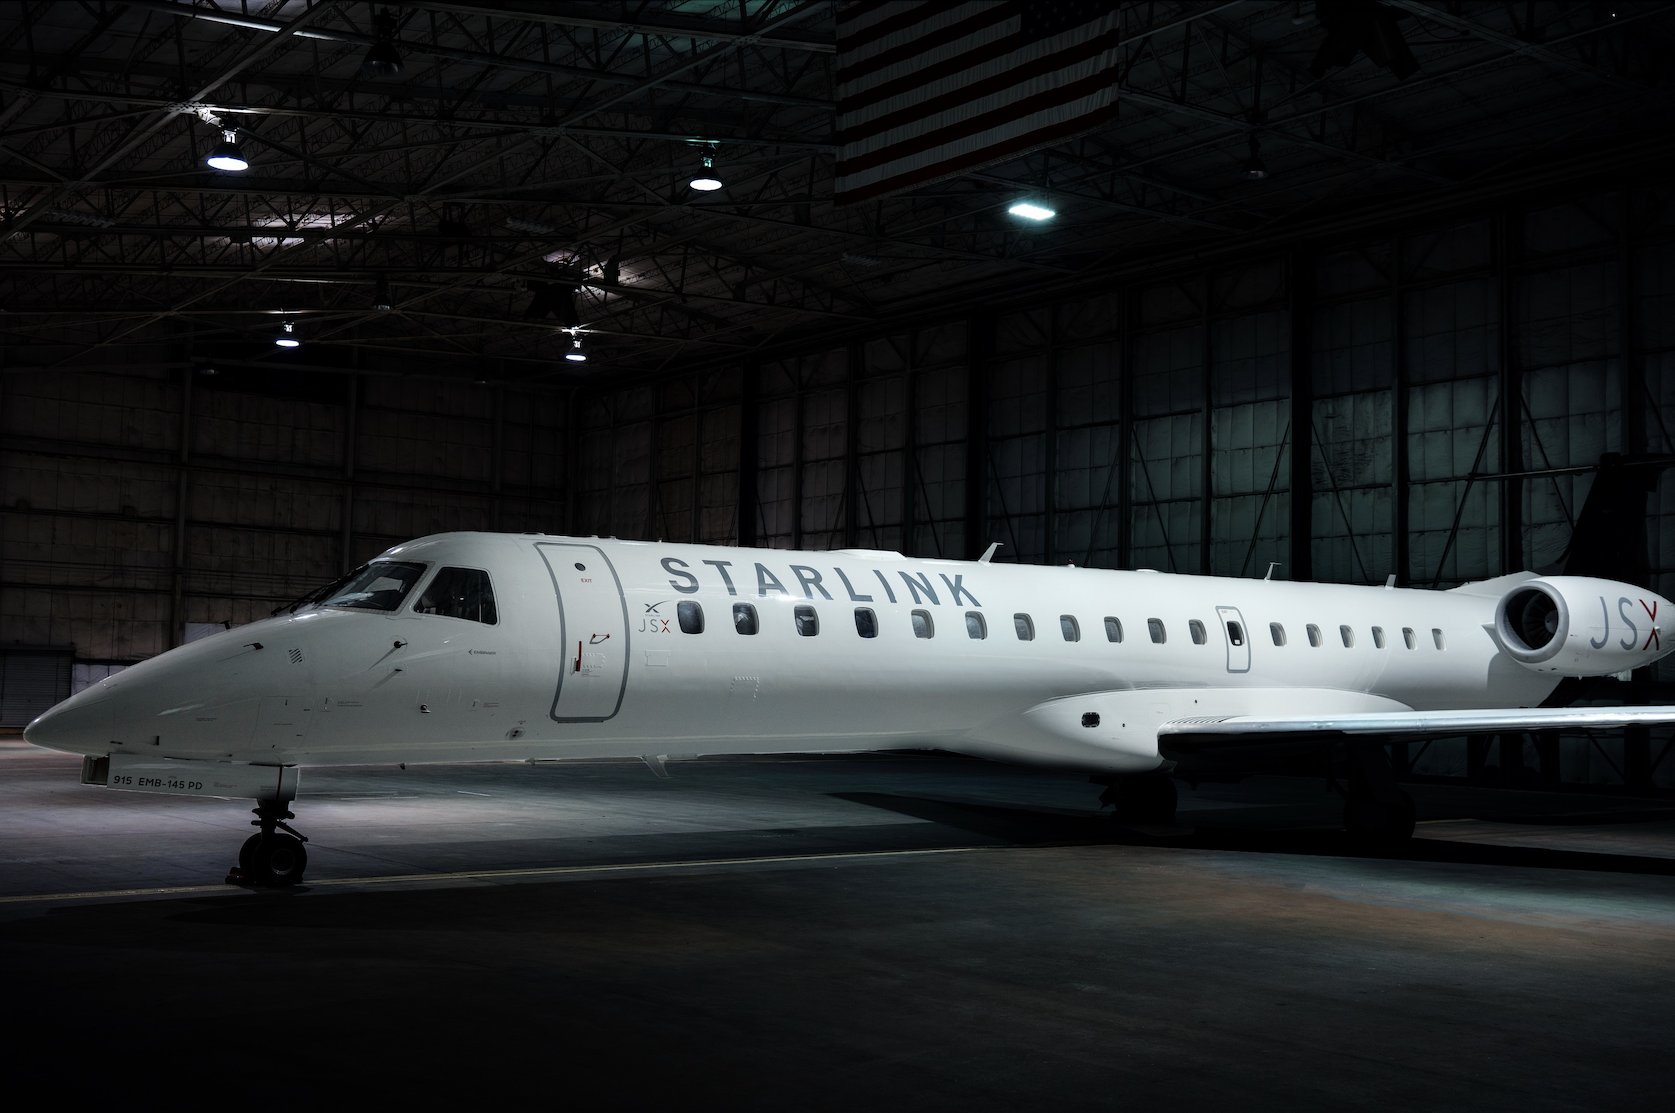 Starlink Aviation takes flight with first private airline